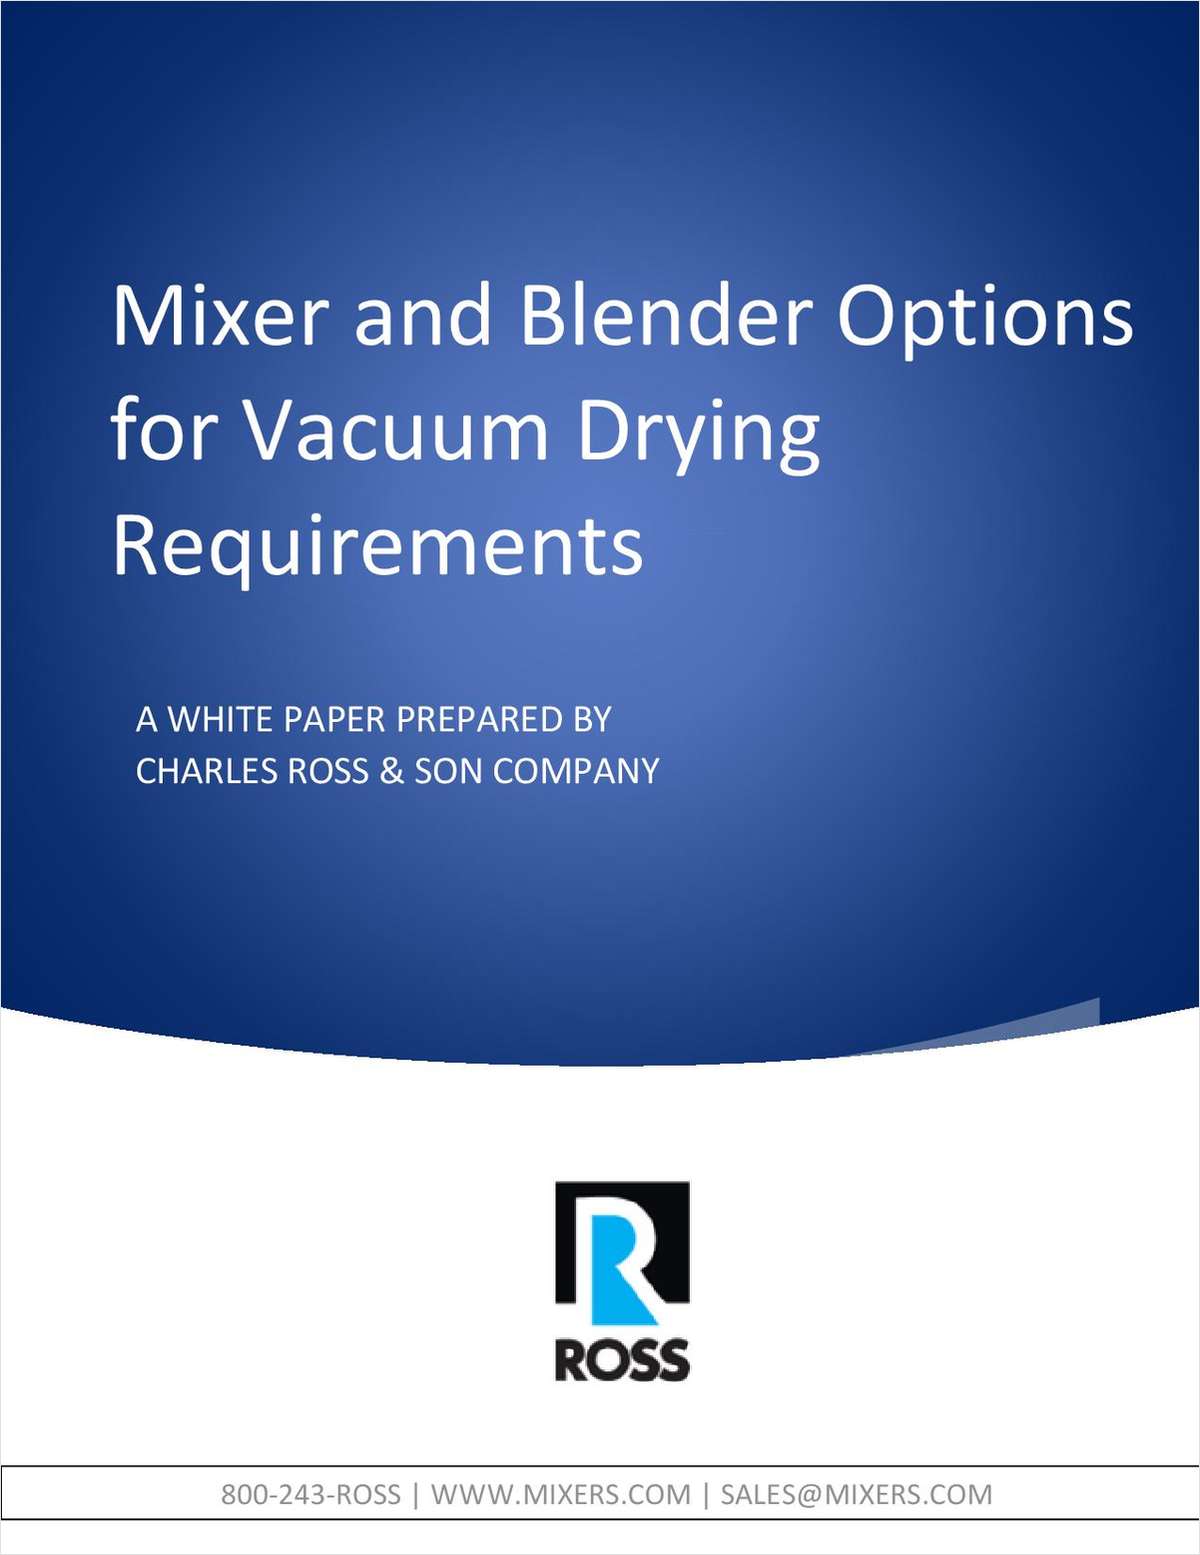 Mixer and Blender Options for Vacuum Drying Requirements